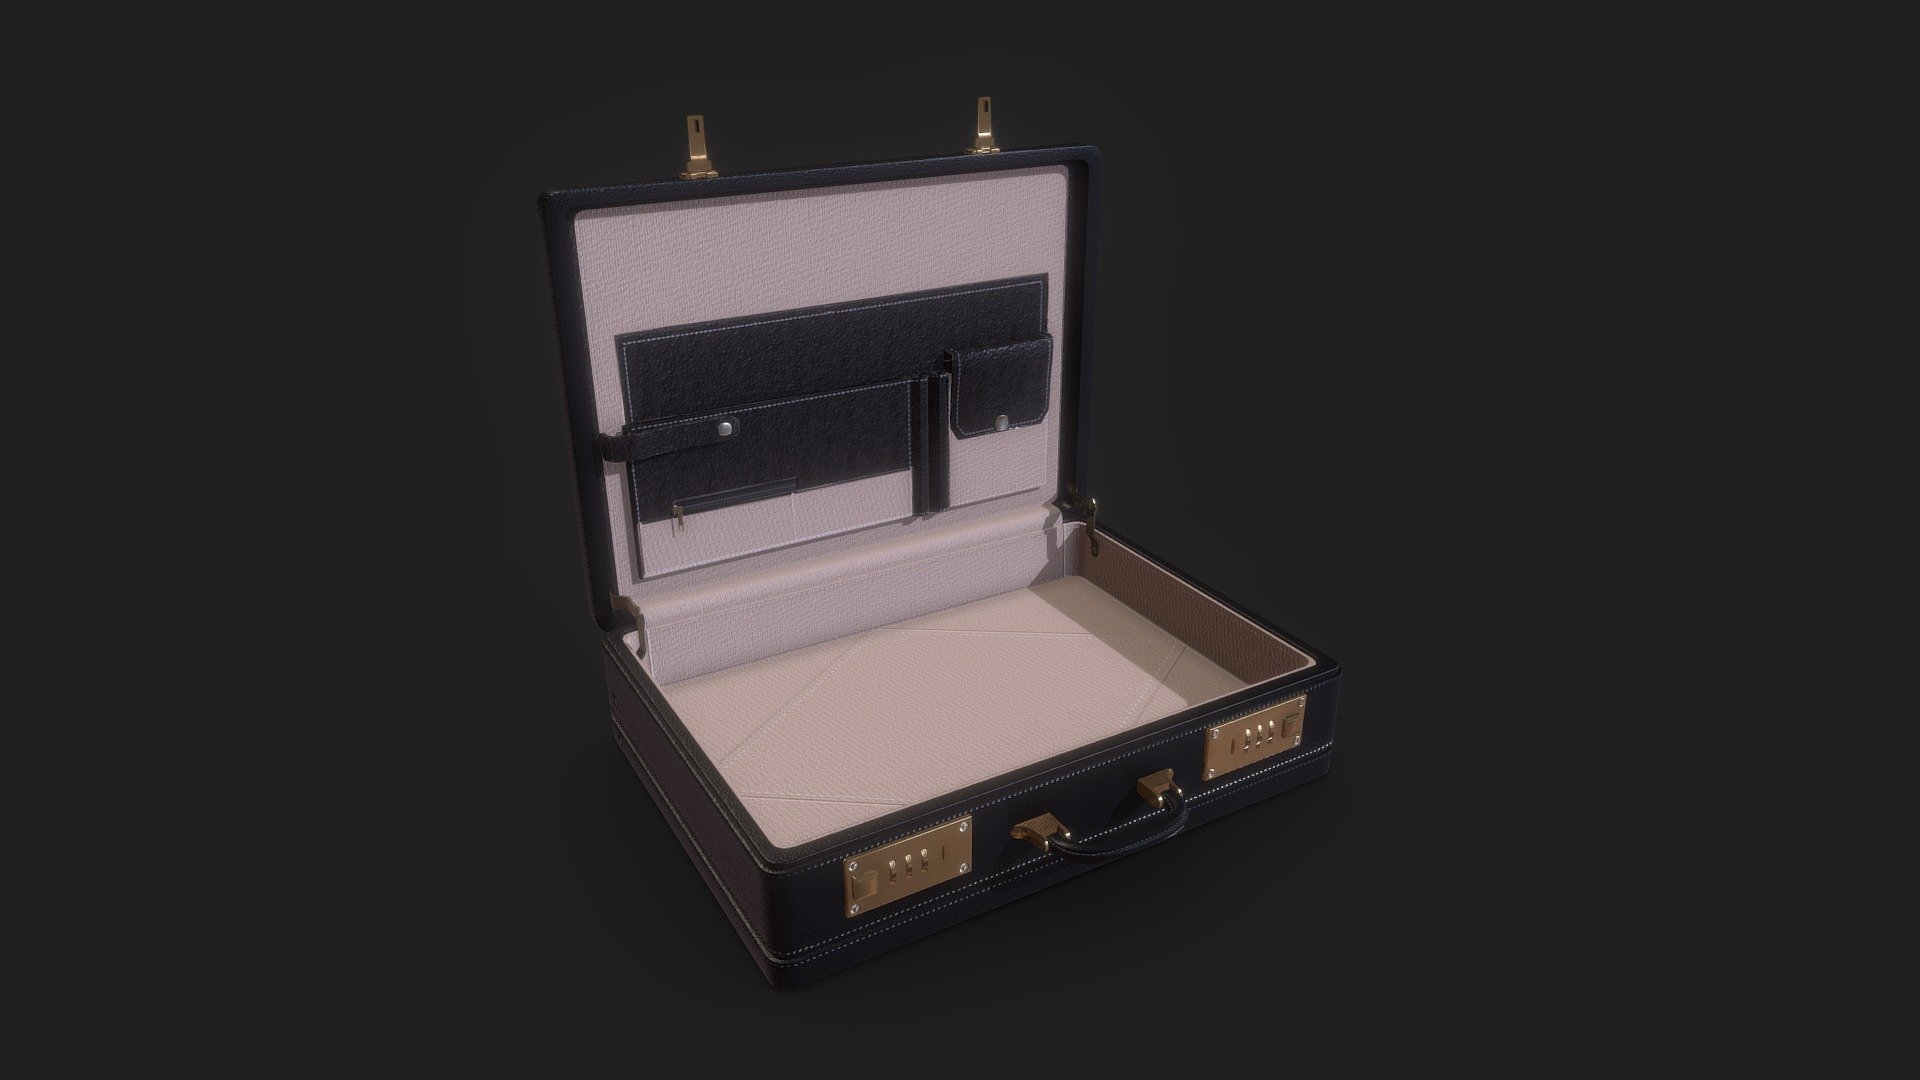 Low poly model of classic briefcase created for Unity 
3ds max, substance painter - Classic Briefcase - 3D model by MikeT (@Dark_Saian) 3d model